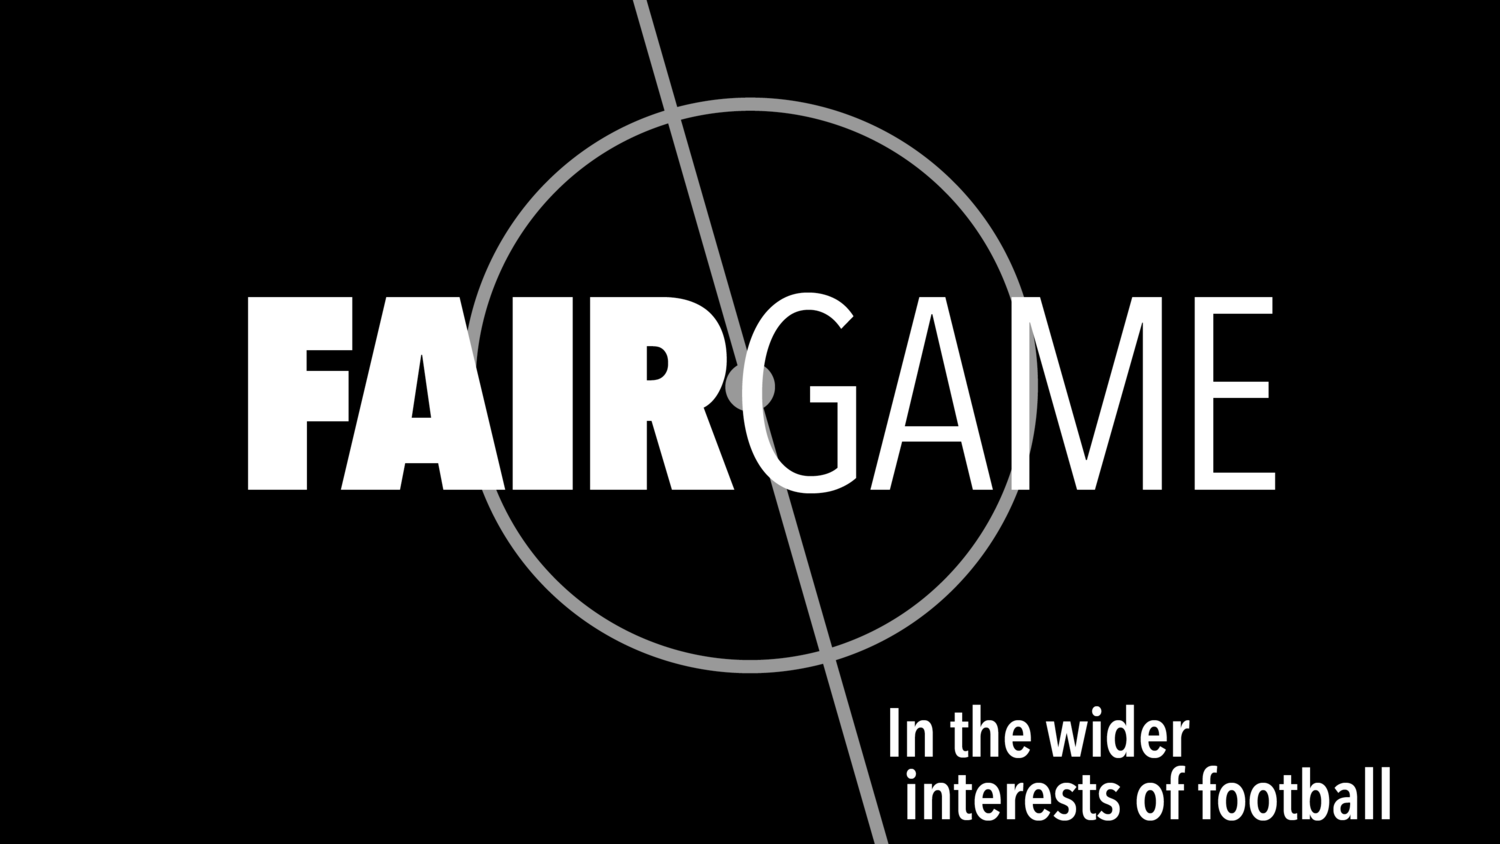 Fair Game Update and The new Independent Football Regulator